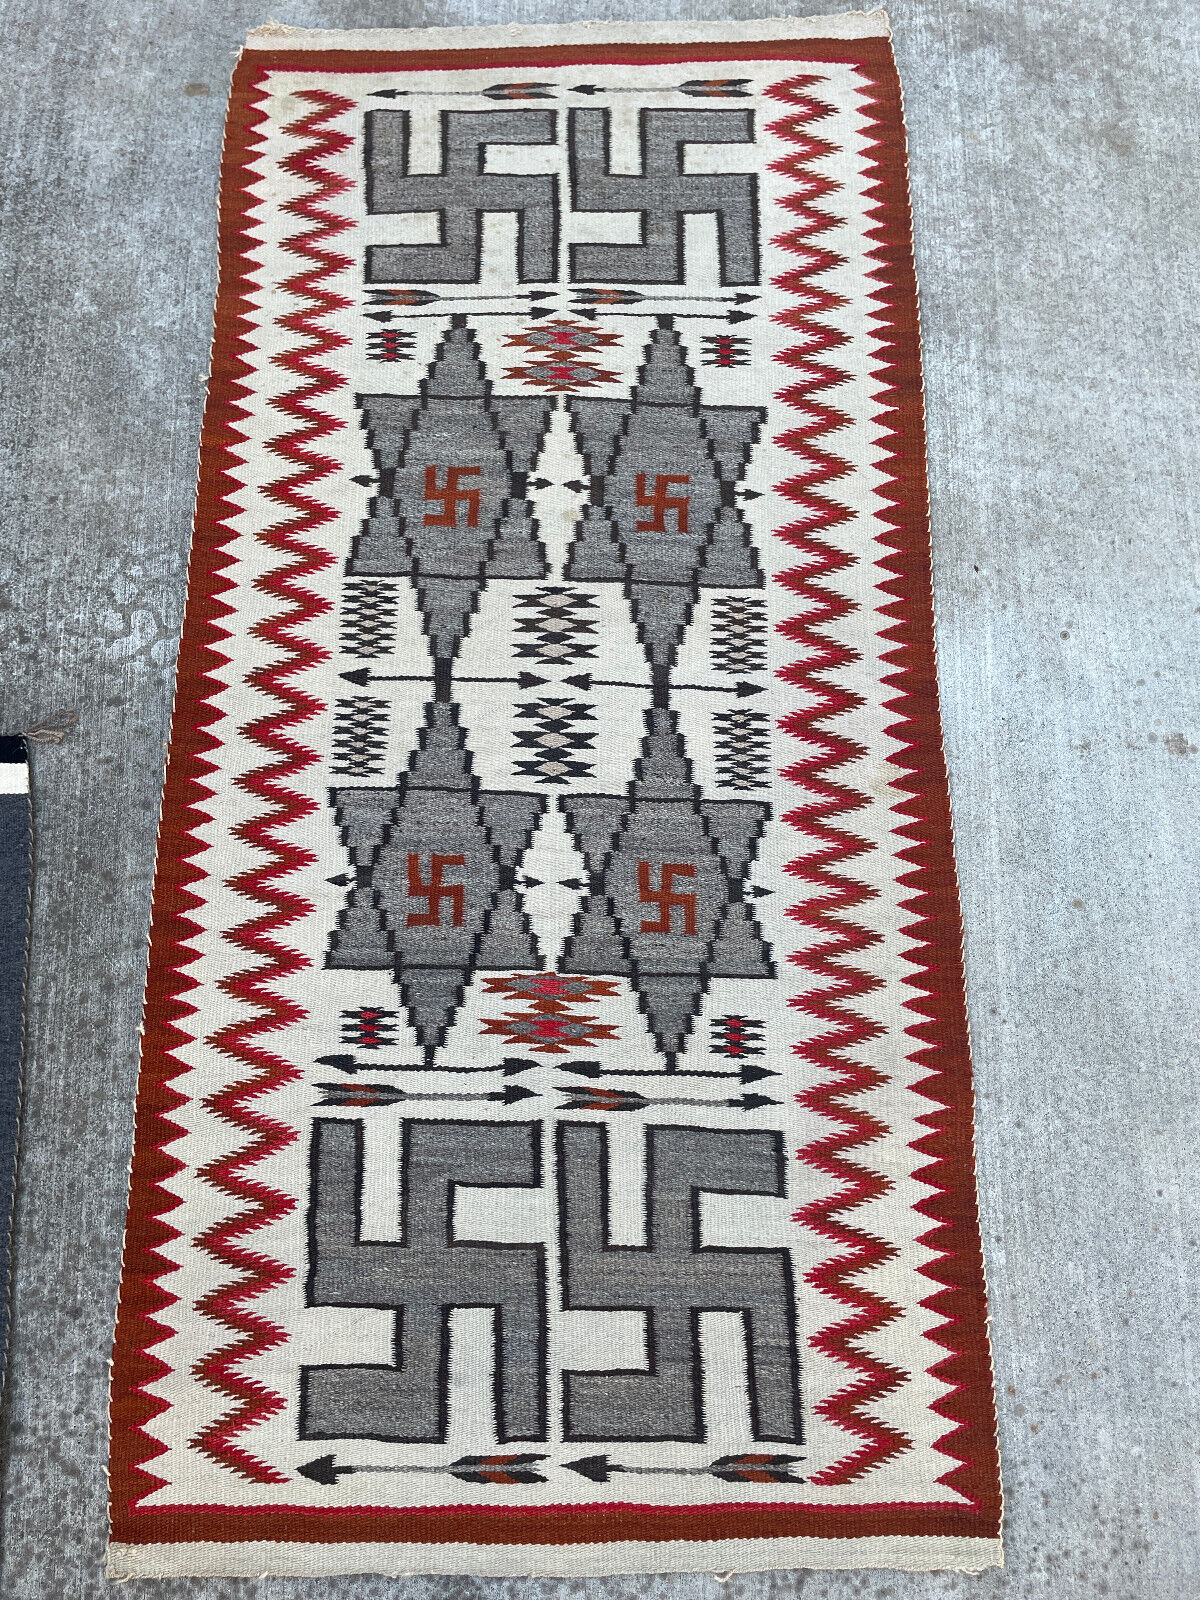 Antique Navajo Rug 1870-1930s Whirling Logs 6 pt Stars Arrows American Indian